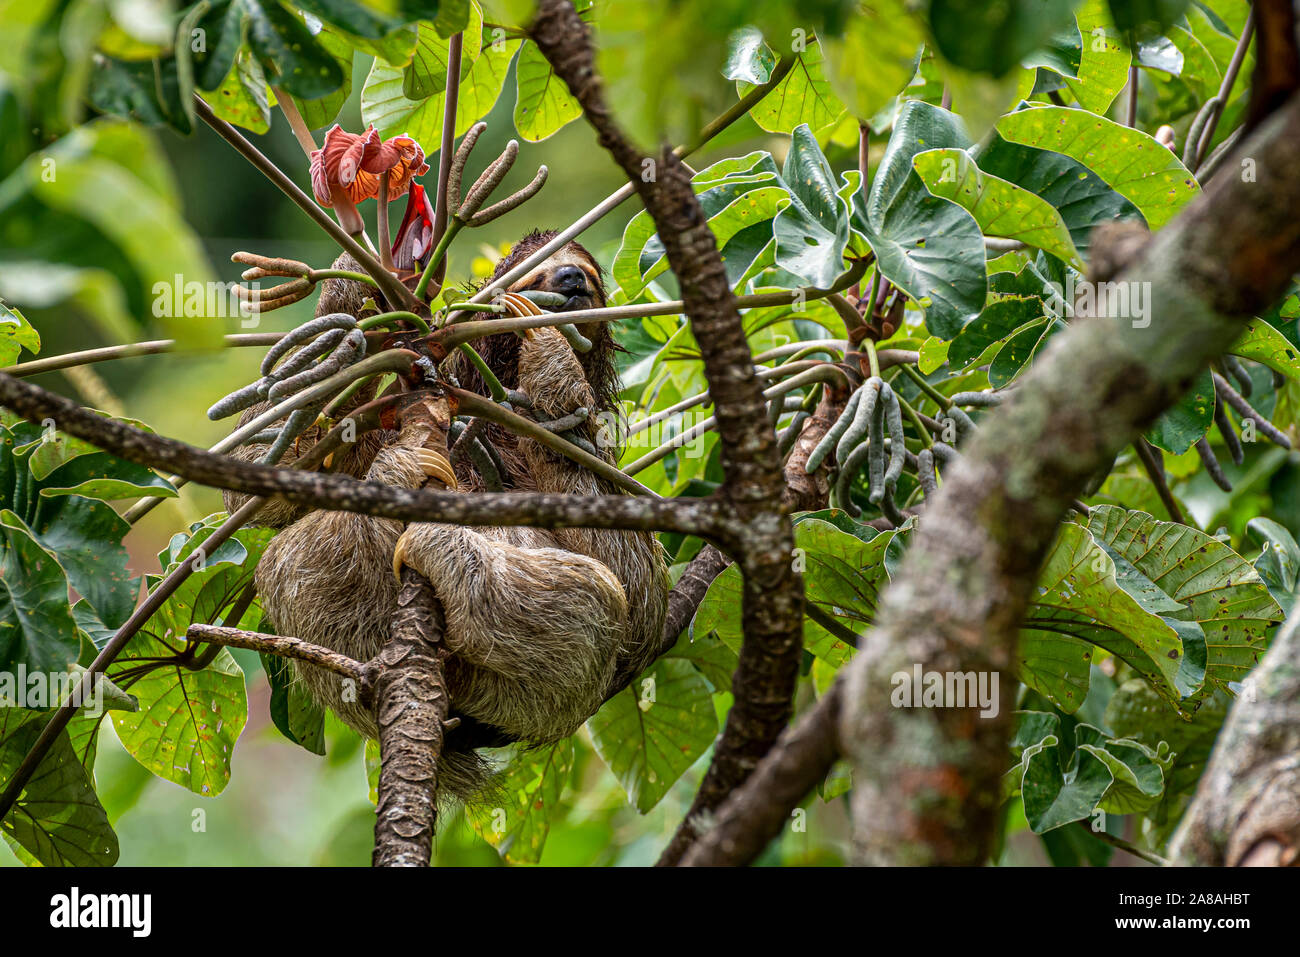 Brown throated three toed sloth feeding on a Cecropia peltata tree image taken in Panamas rain forest Stock Photo